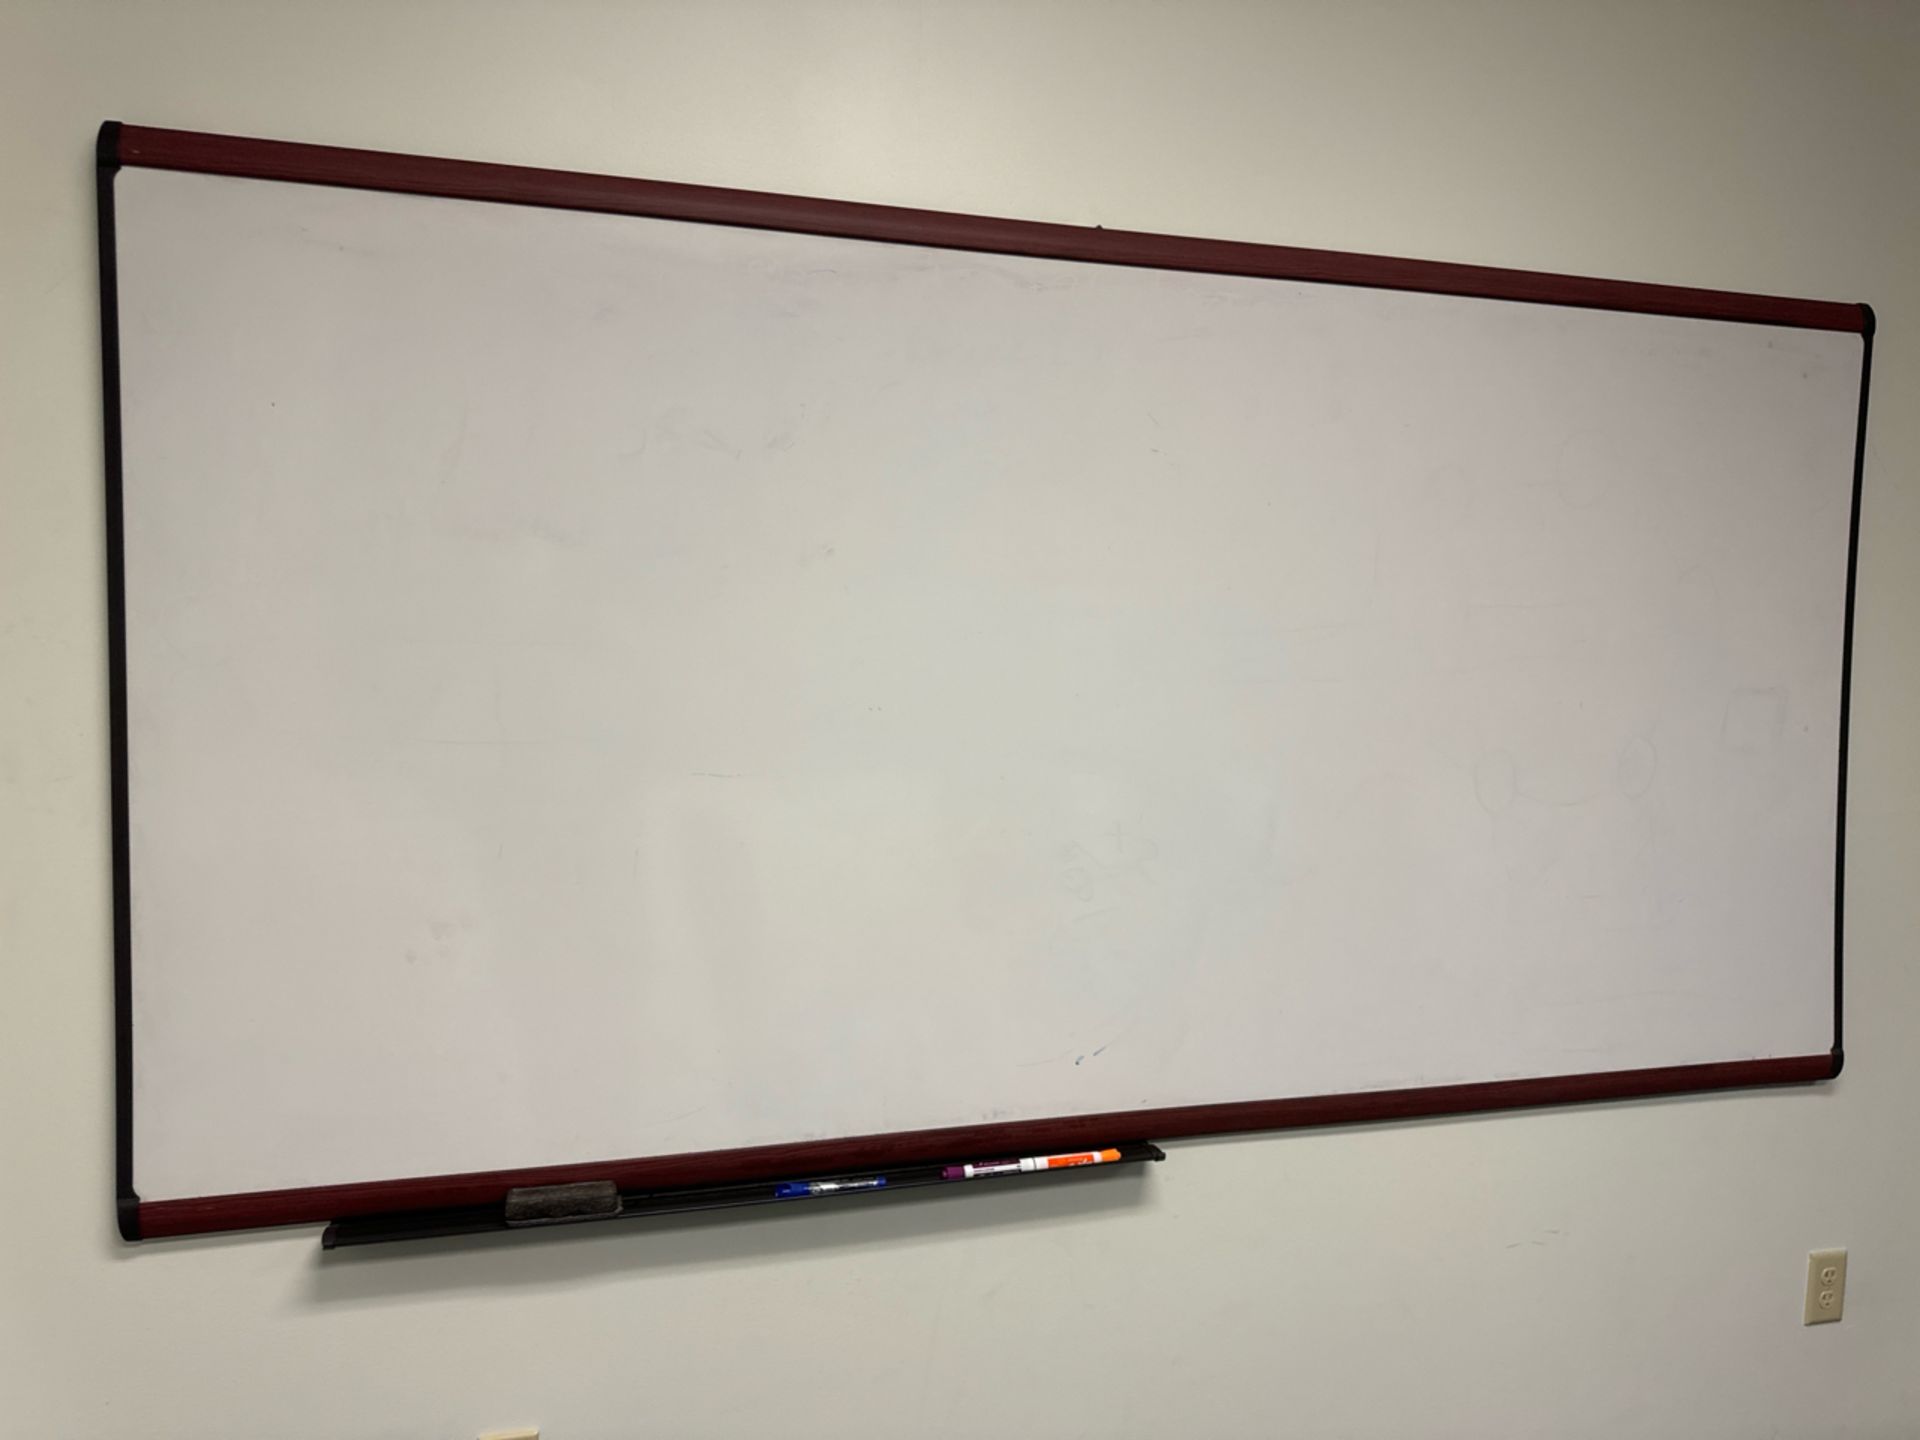 Contents of CMU Conference Room - Image 5 of 6